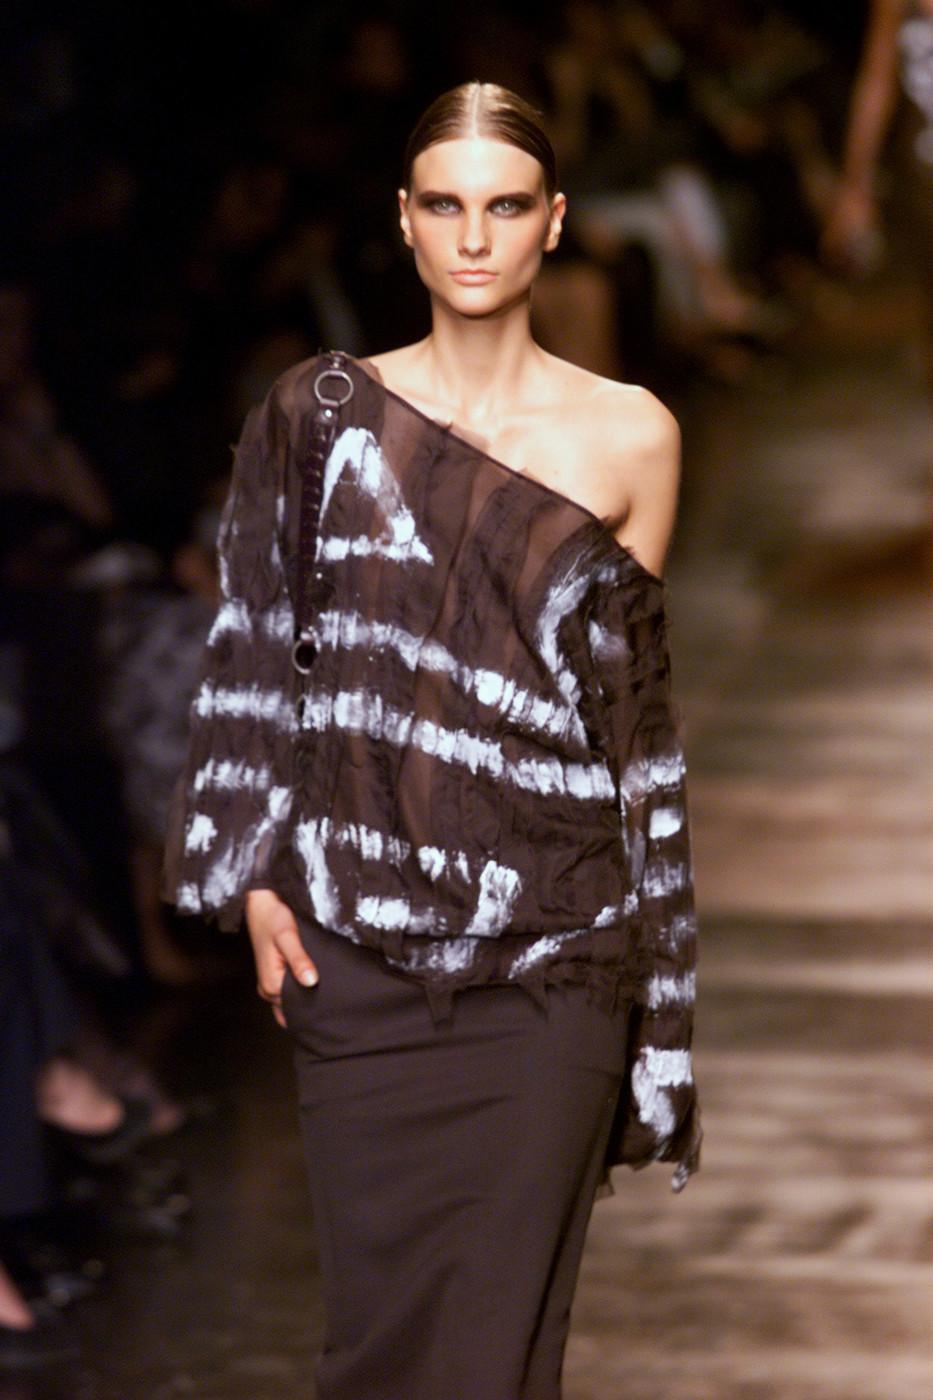 Tom Ford for Yves Saint Laurent Rive Gauche Semi-Sheer Sexy Top - Rare to Find!
Spring/Summer 2002 Collection
Designer size - M
100% Silk, Dark Brown, Unique Hand-Painted Design, Silk Painted Distressed Panels Over the Semi-Sheer Stretch Knit, Slip